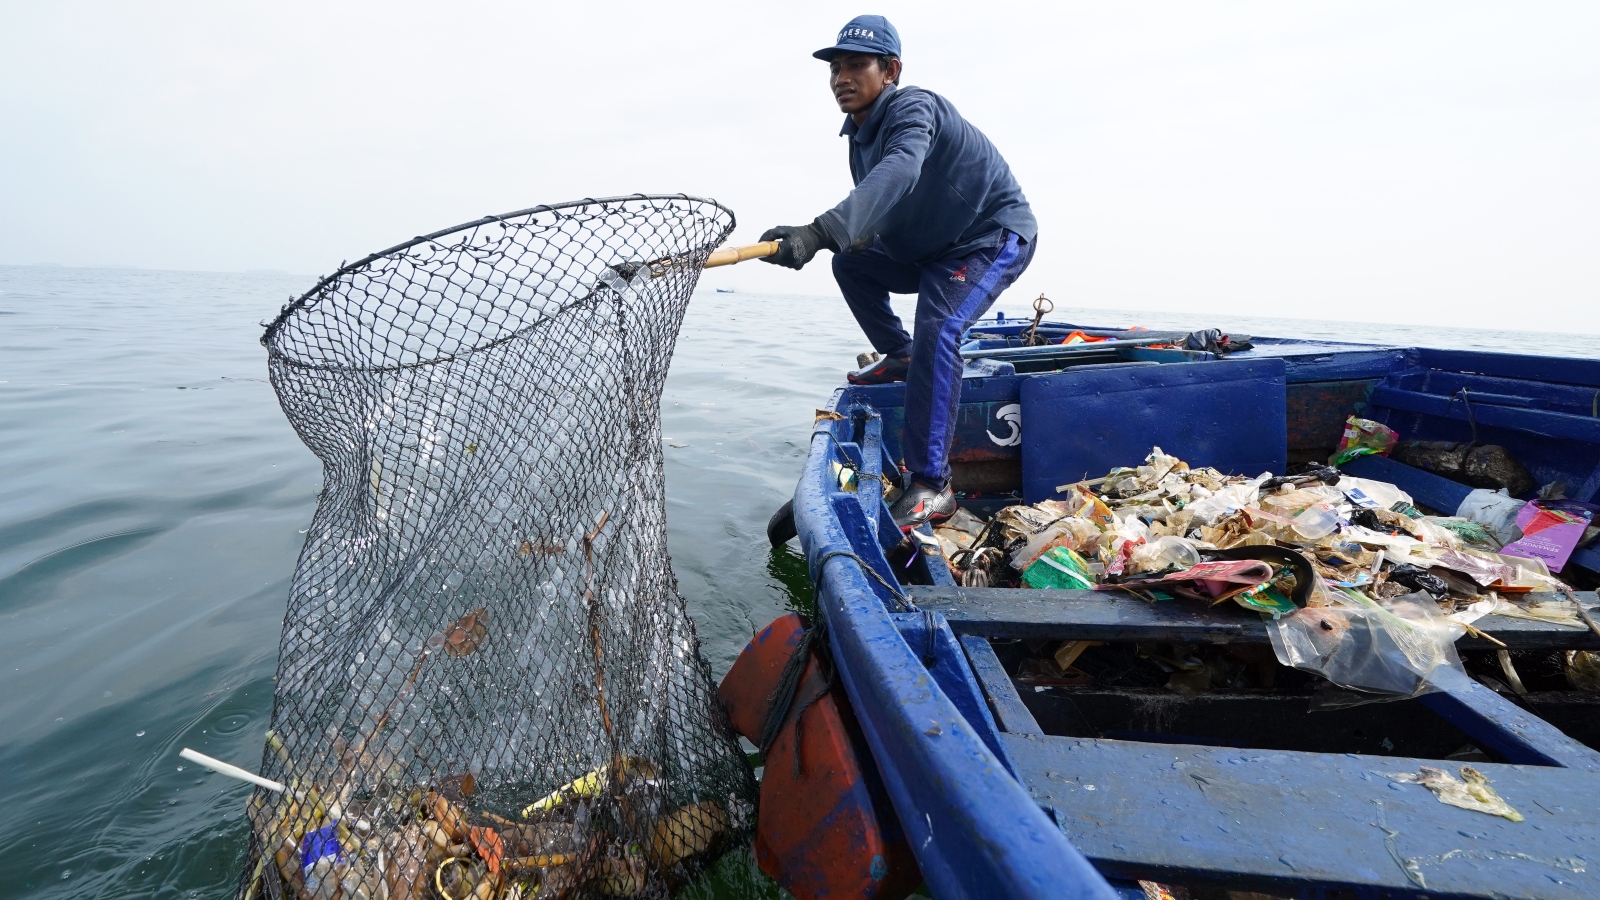 A worker from the Danish firm ReSea Project collecting plastic waste in Indonesia, home to some of the world's most polluted waters.